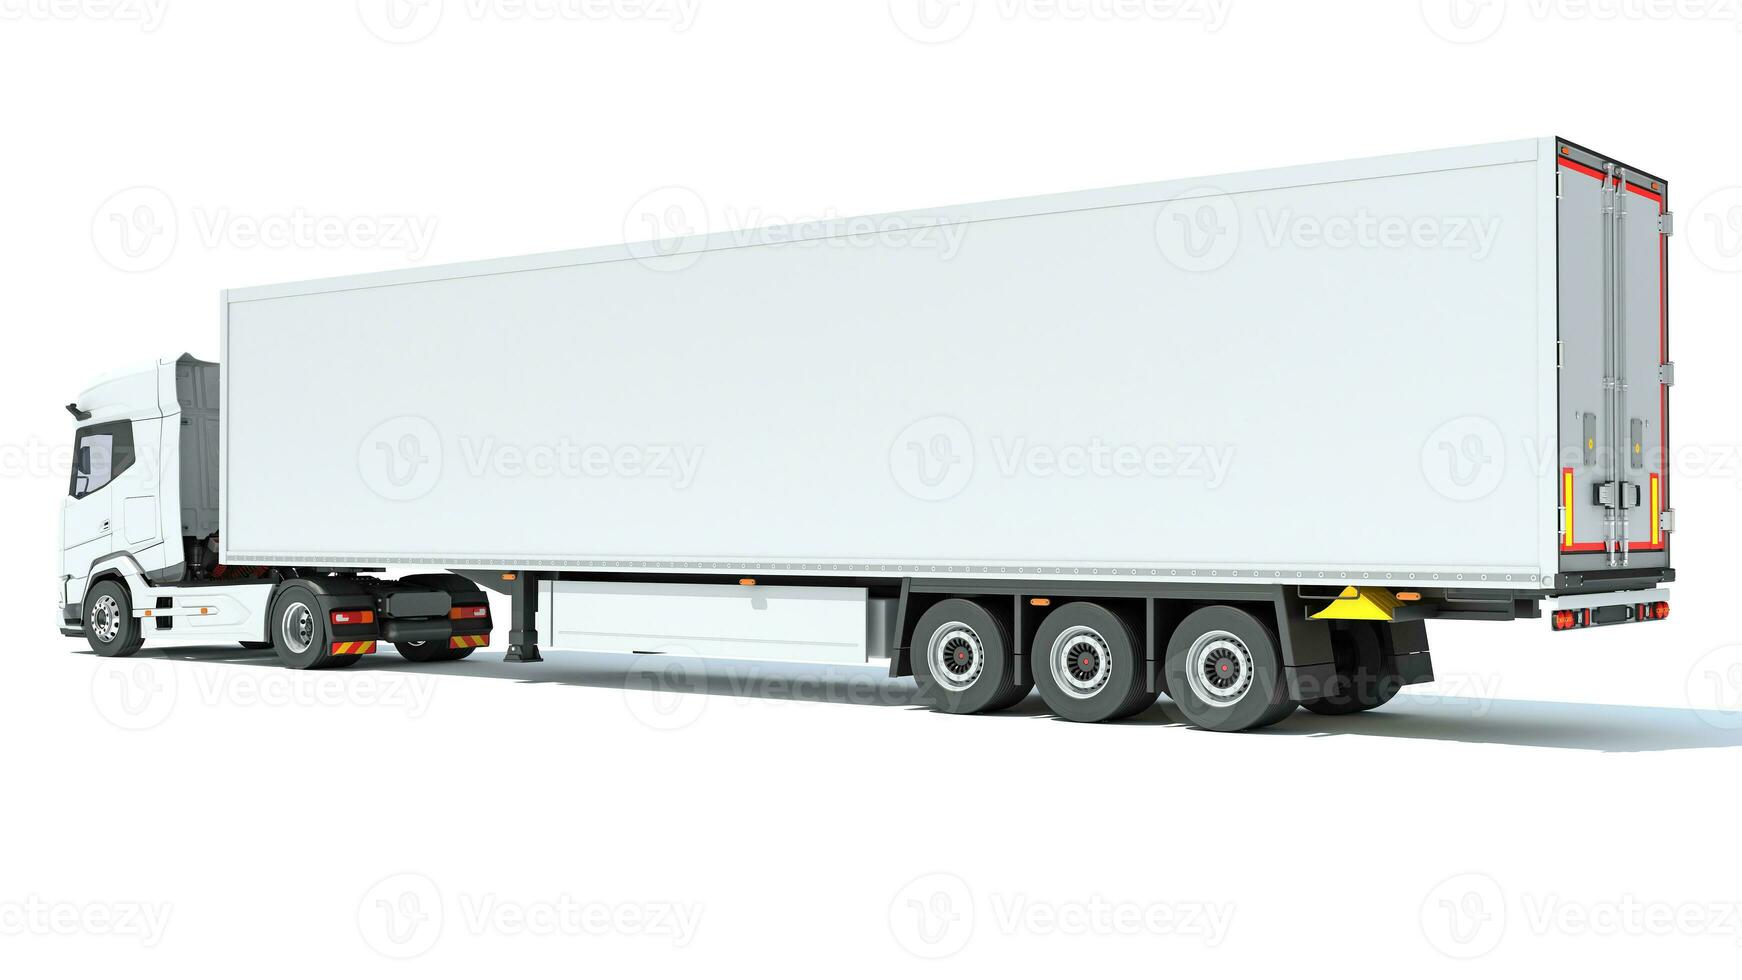 Truck with Reefer Refrigerator Trailer 3D rendering on white background photo